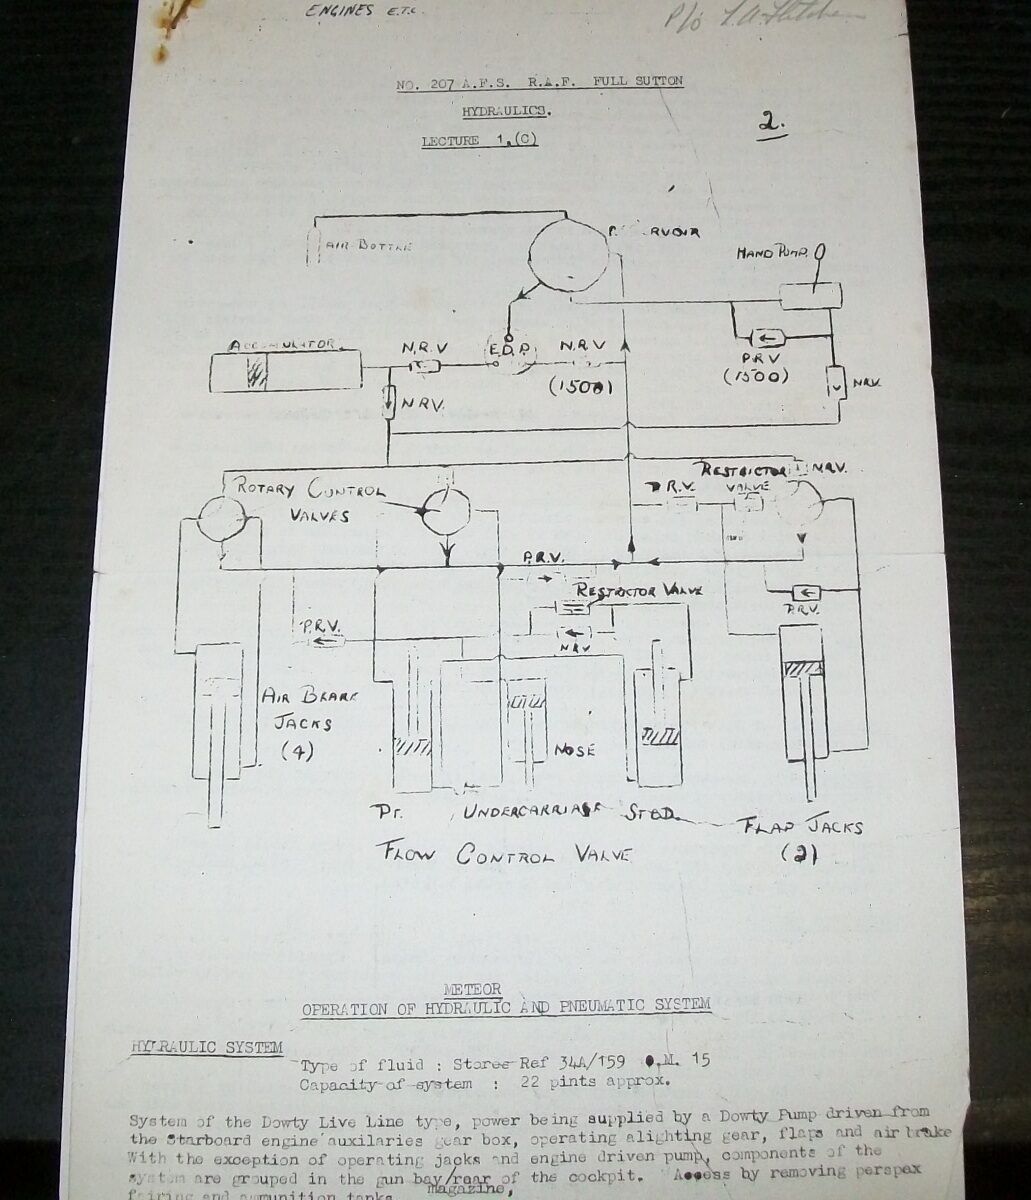 METEOR HYDRAULIC & PNEUMATICS LECTURE NOTES 1C  RAF AFS No. 207. FULL SUTTON